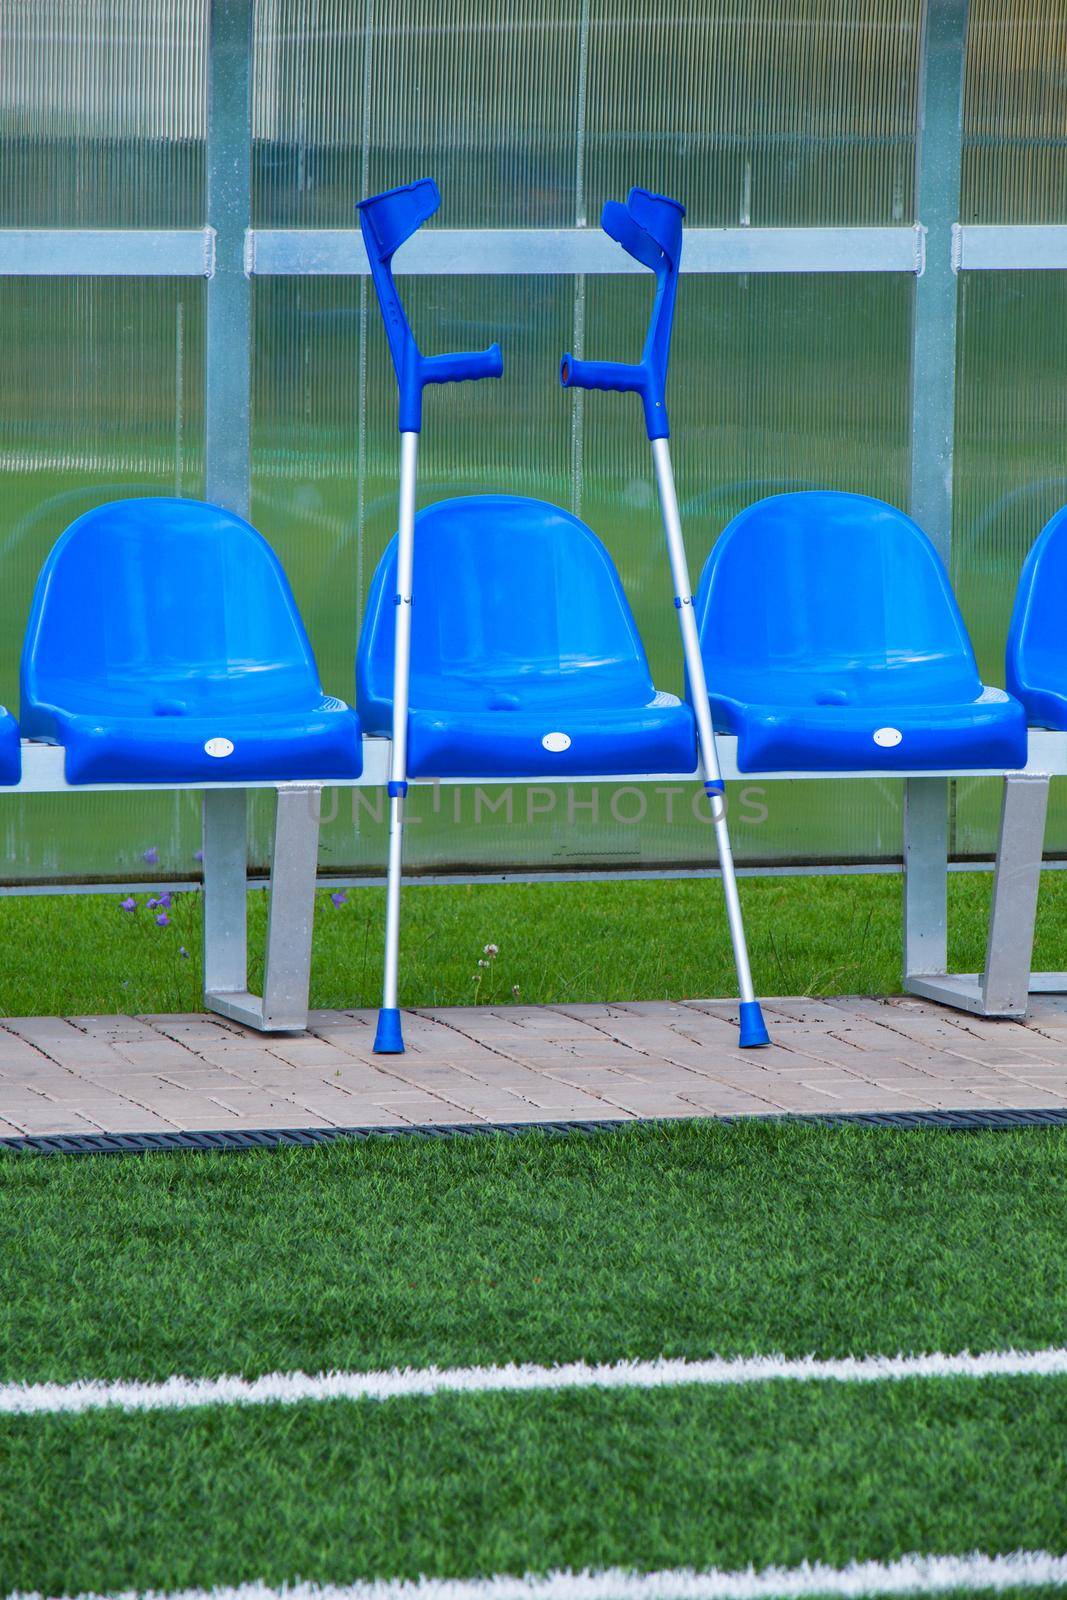 Crutch at blue plastic seats on outdoor stadium players bench, chairs with new paint below transparent plastic roof. 